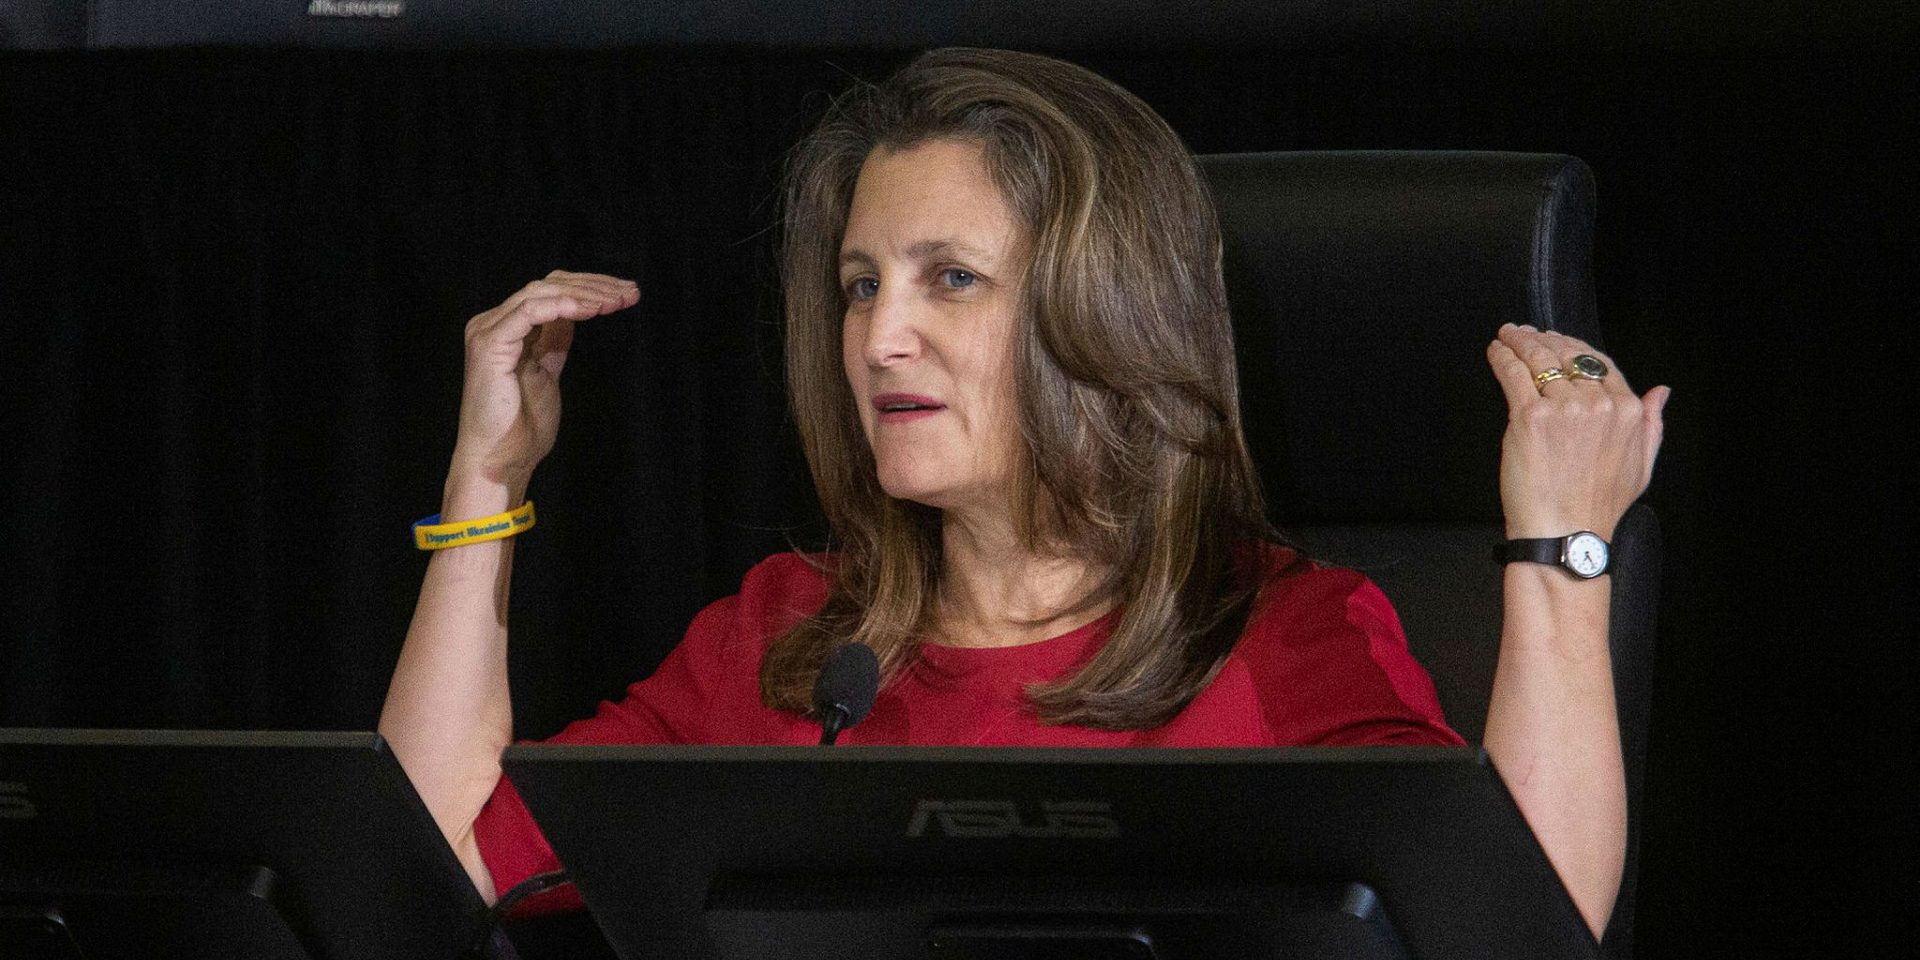 Deputy Prime Minister Chrystia Freeland appears before the Public Emergency Order Commission at Library and Archives Canada in Ottawa on  Nov. 24, 2022, to provide testimony about the winter 2022 Freedom Convoy occupation of Ottawa. The Hill Times photograph by Andrew Meade